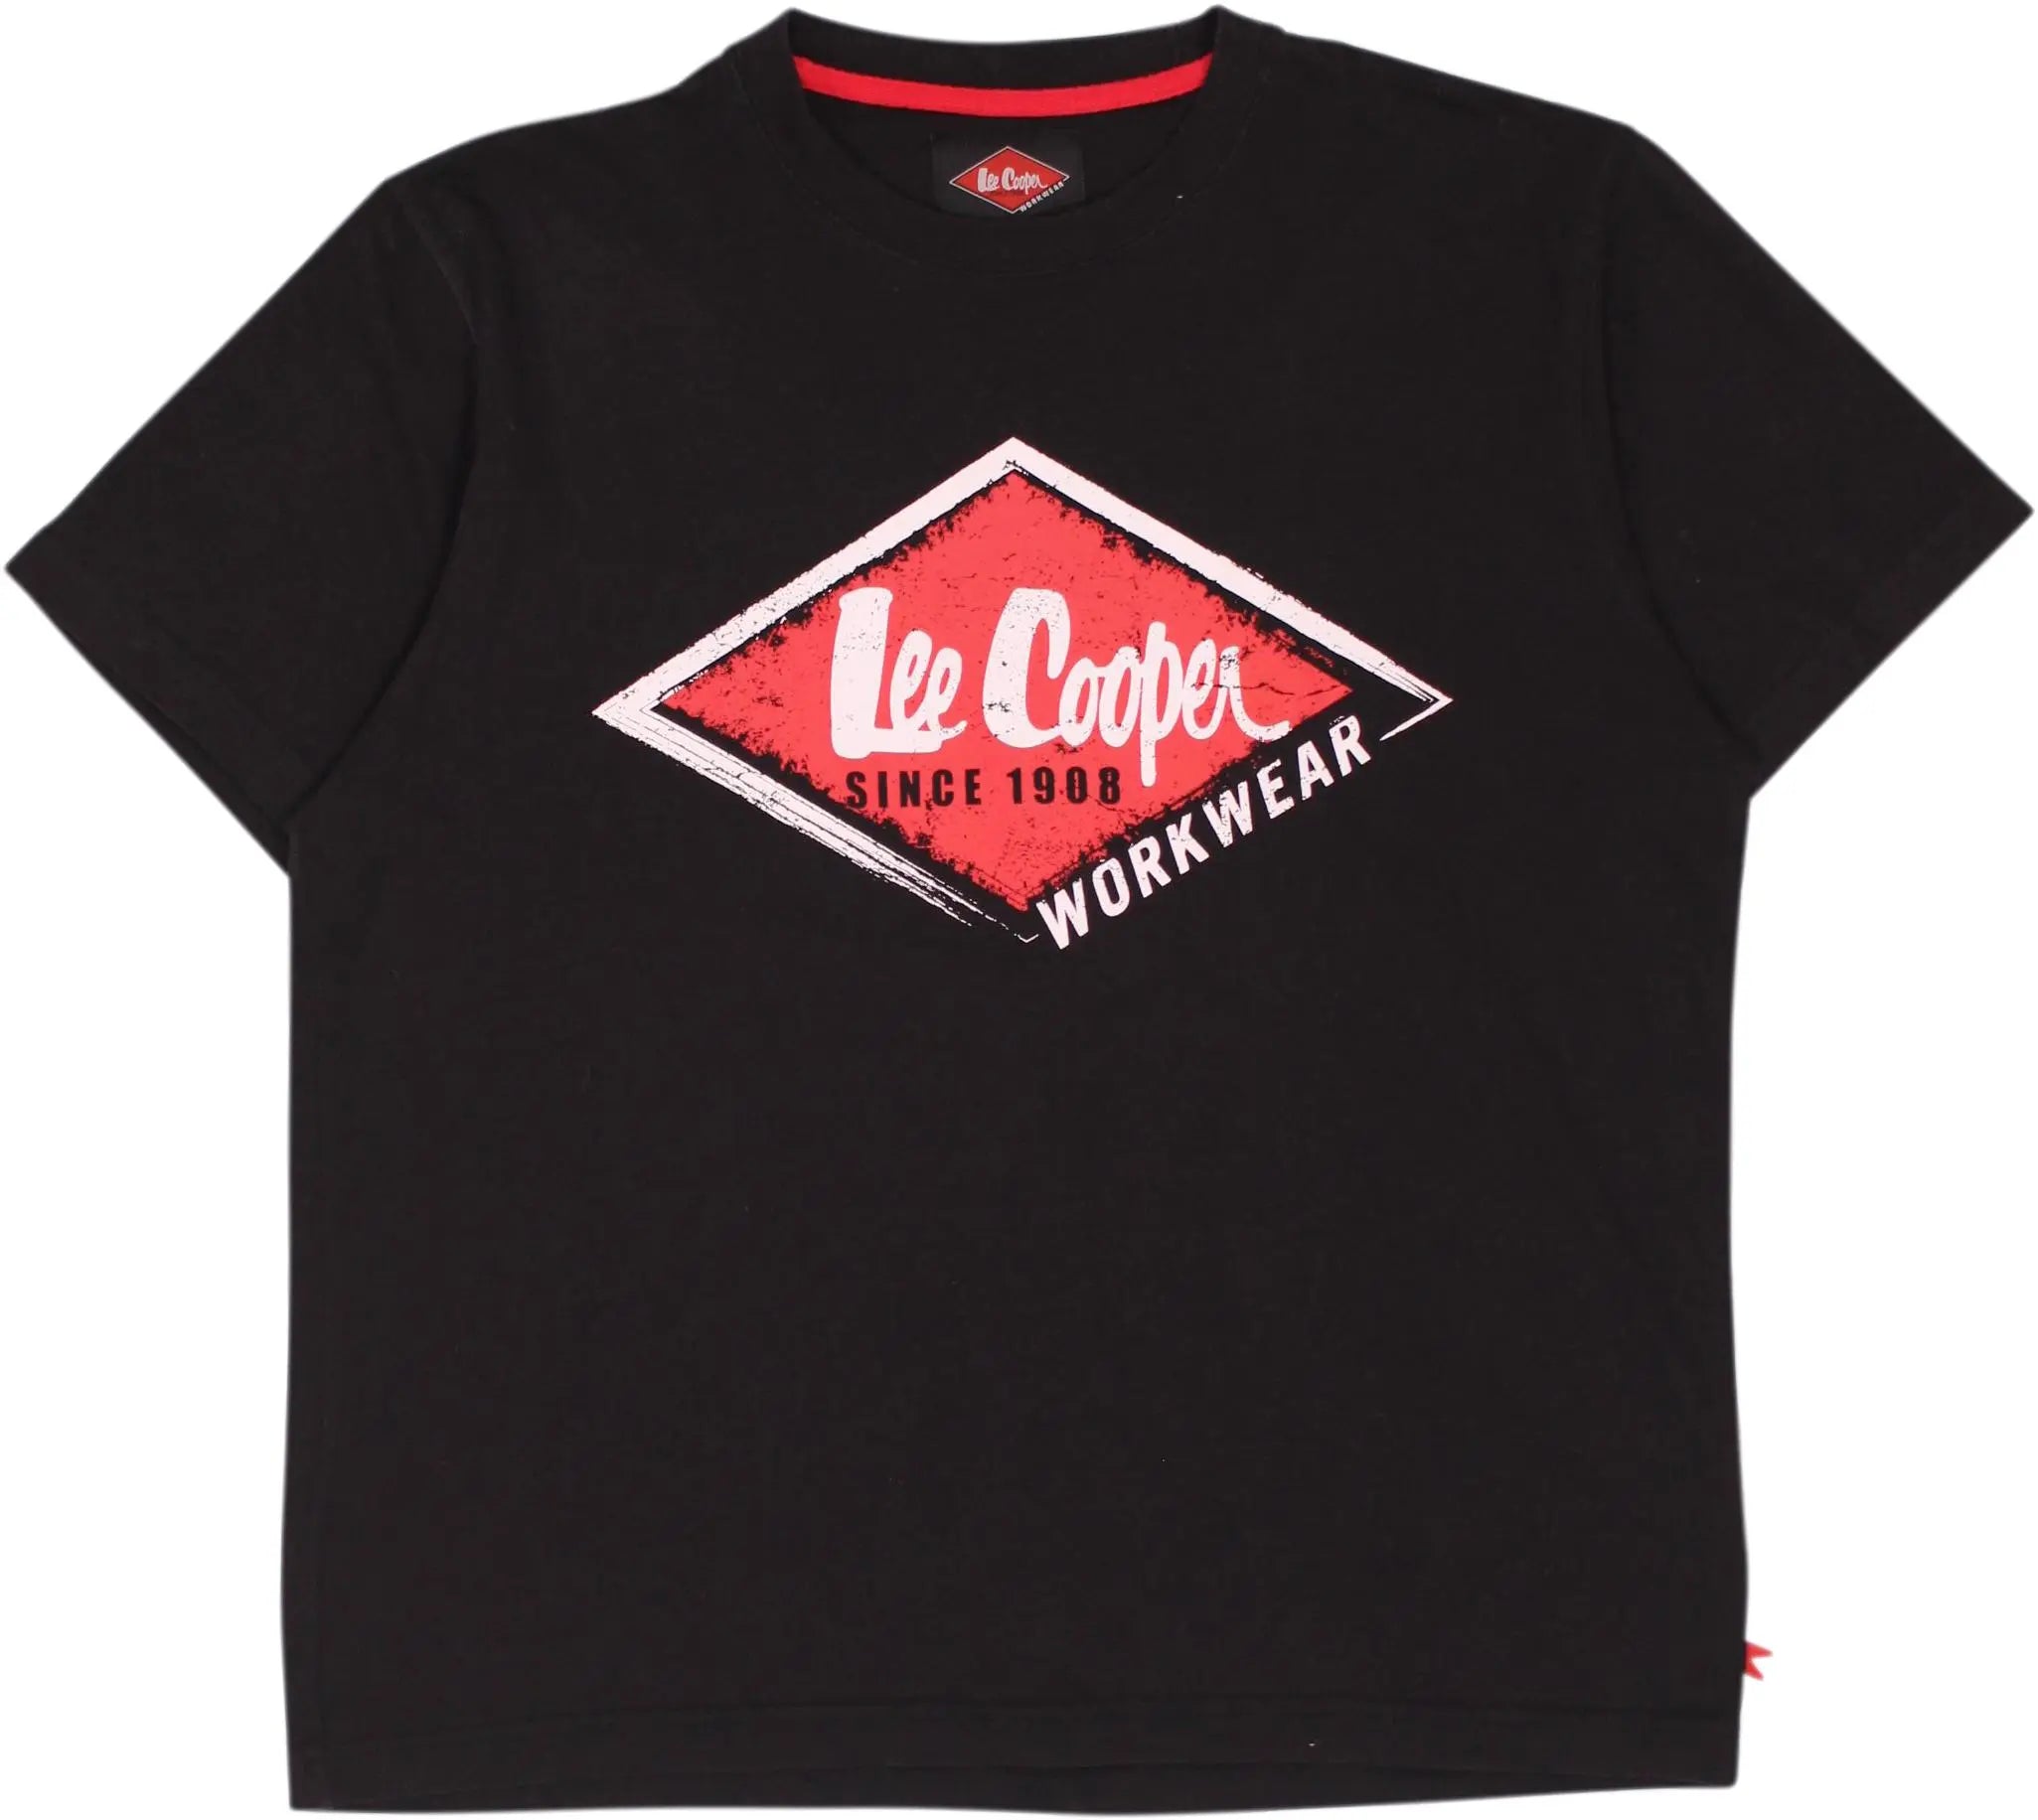 Lee Cooper - Black T-shirt by Lee Cooper- ThriftTale.com - Vintage and second handclothing